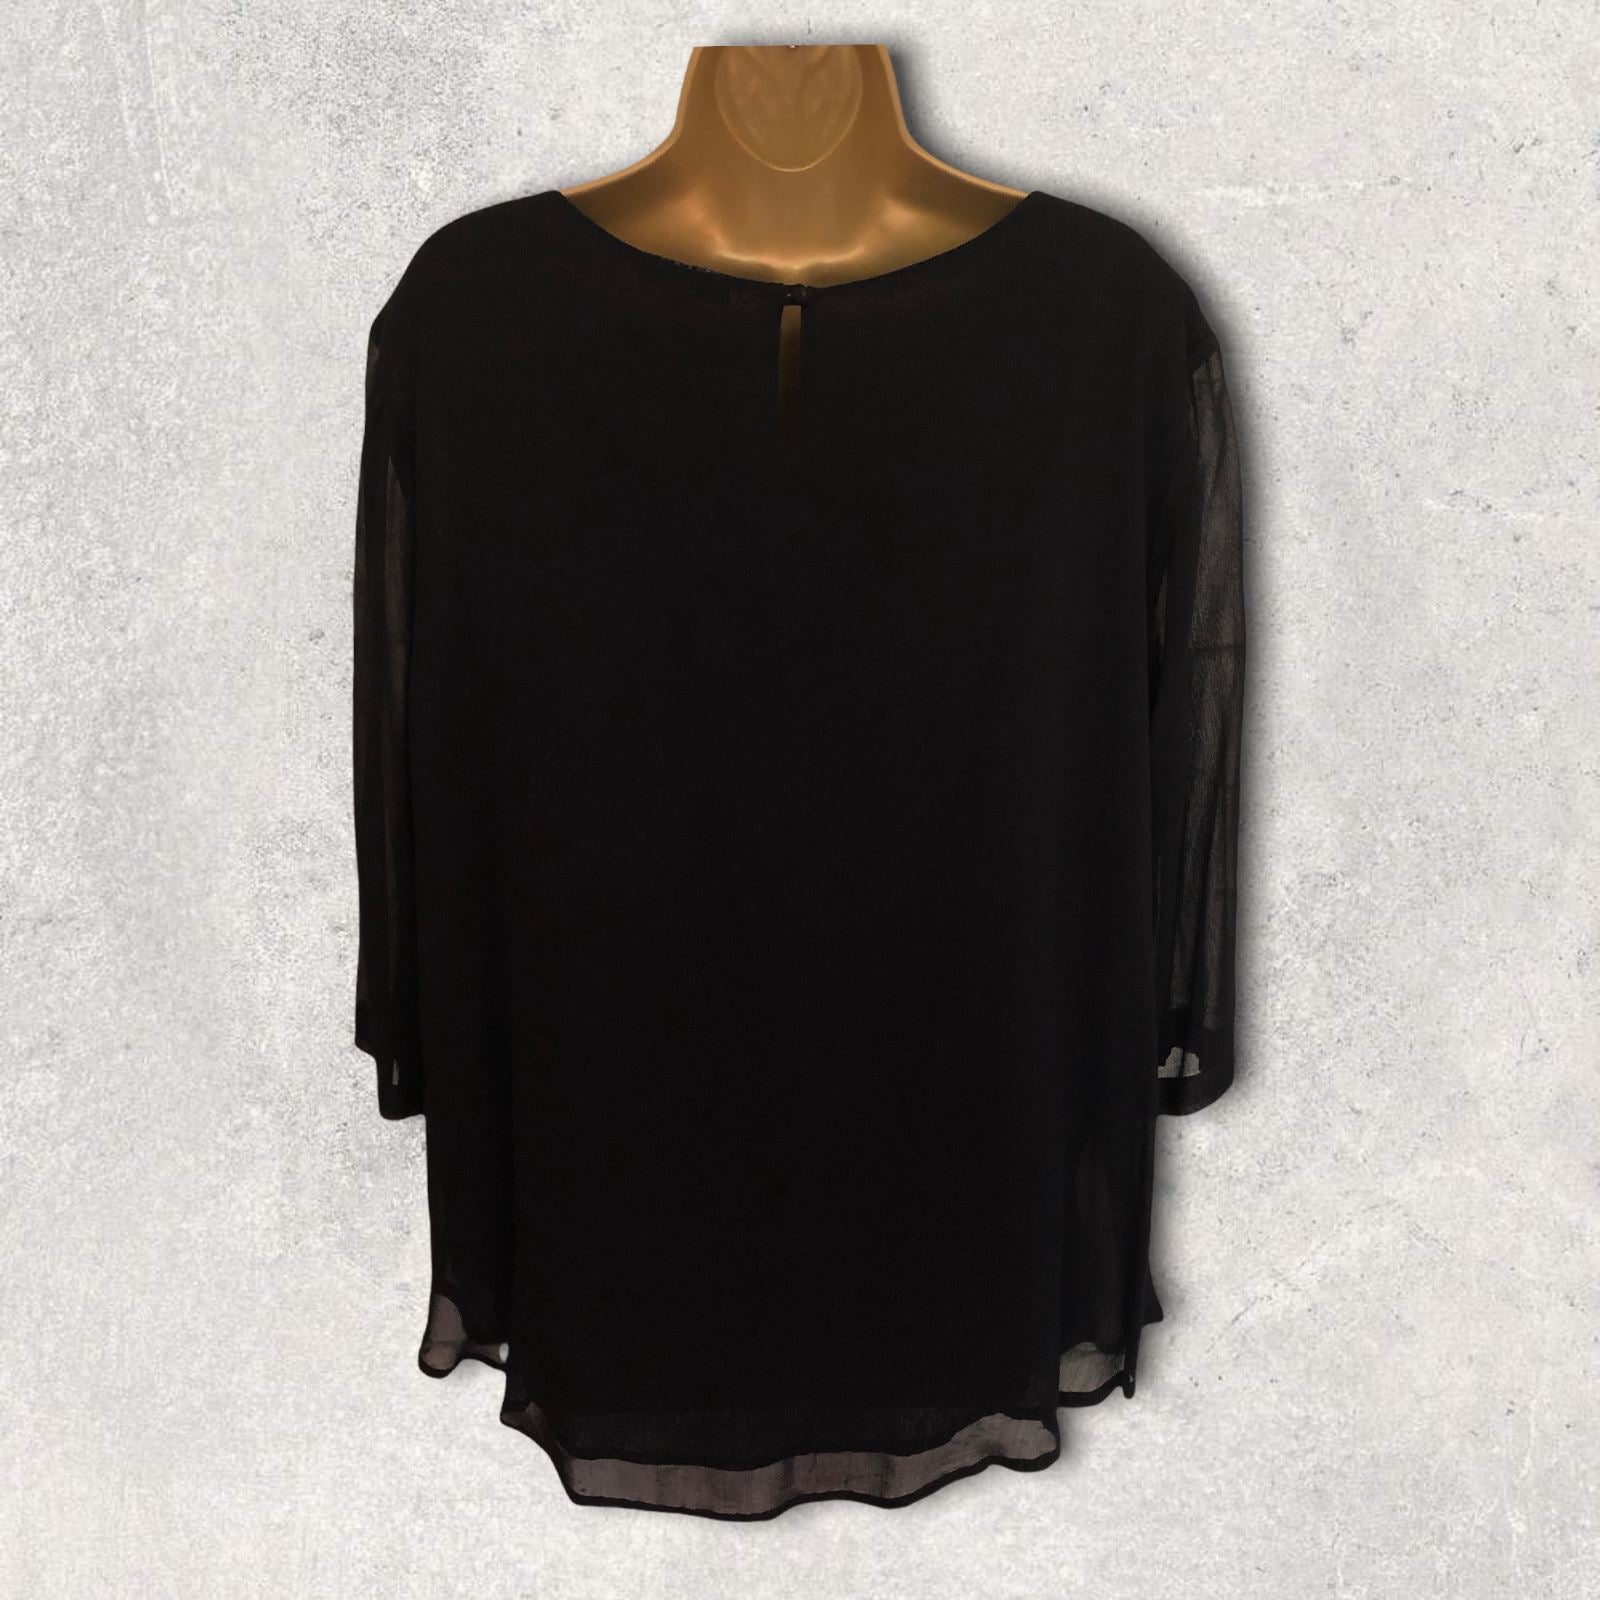 Pomodoro Black Chiffon Embroidered Floral Top UK 18 US 14 EU 46 RRP £59.95 Timeless Fashions